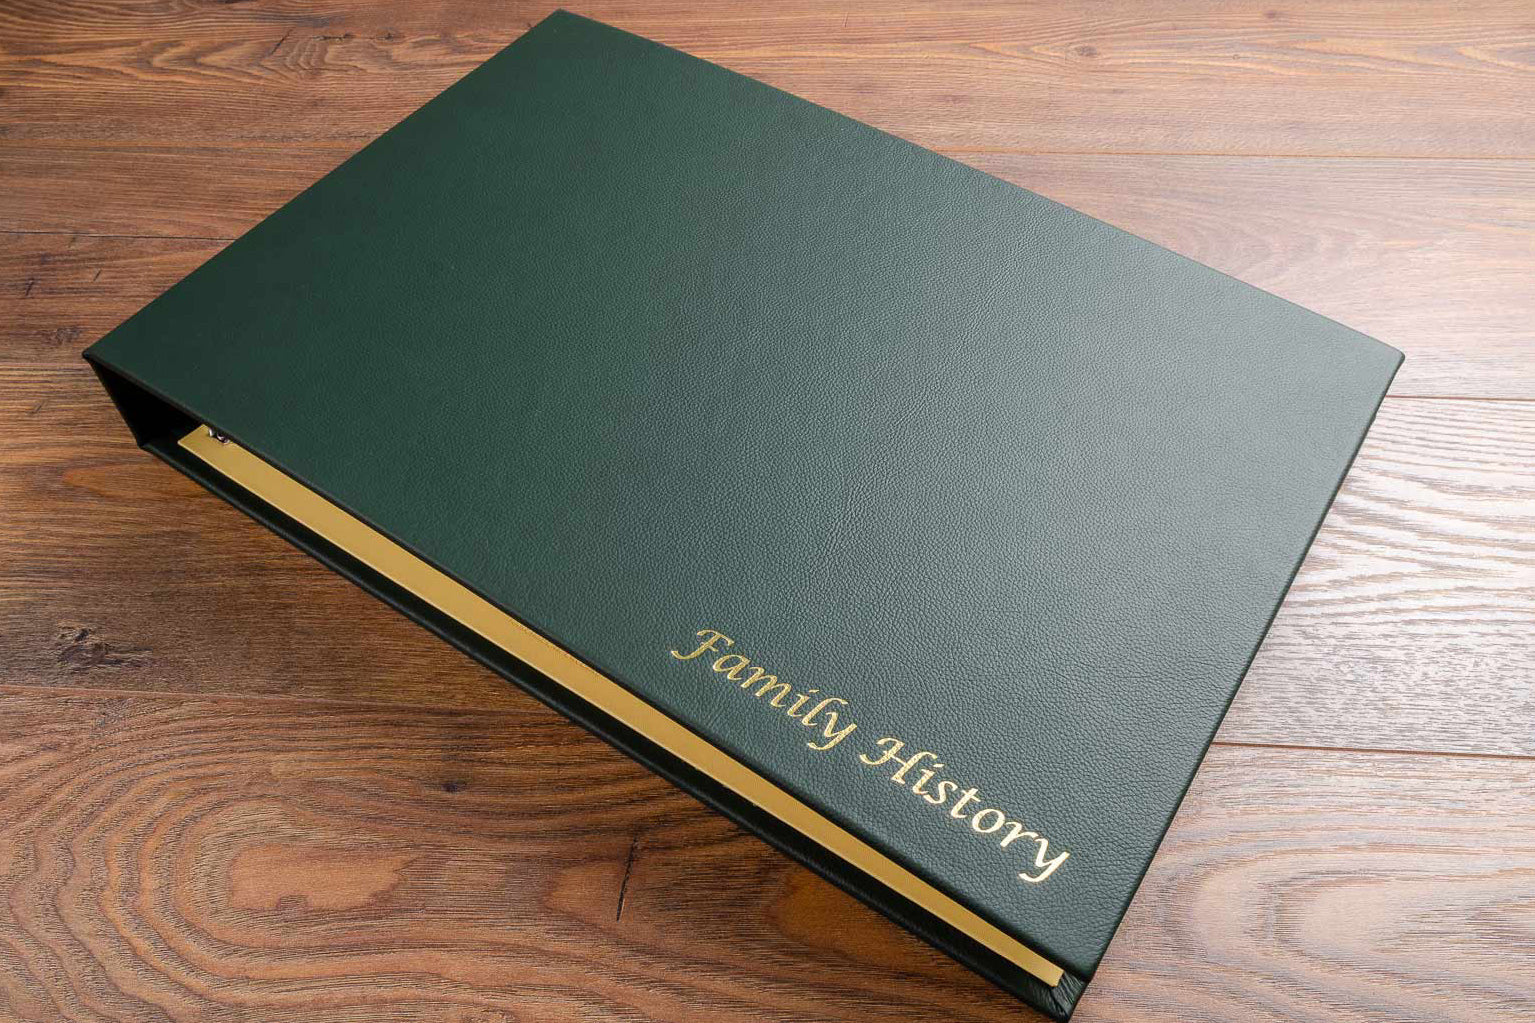 Bespoke made family history binder with yellow inlay